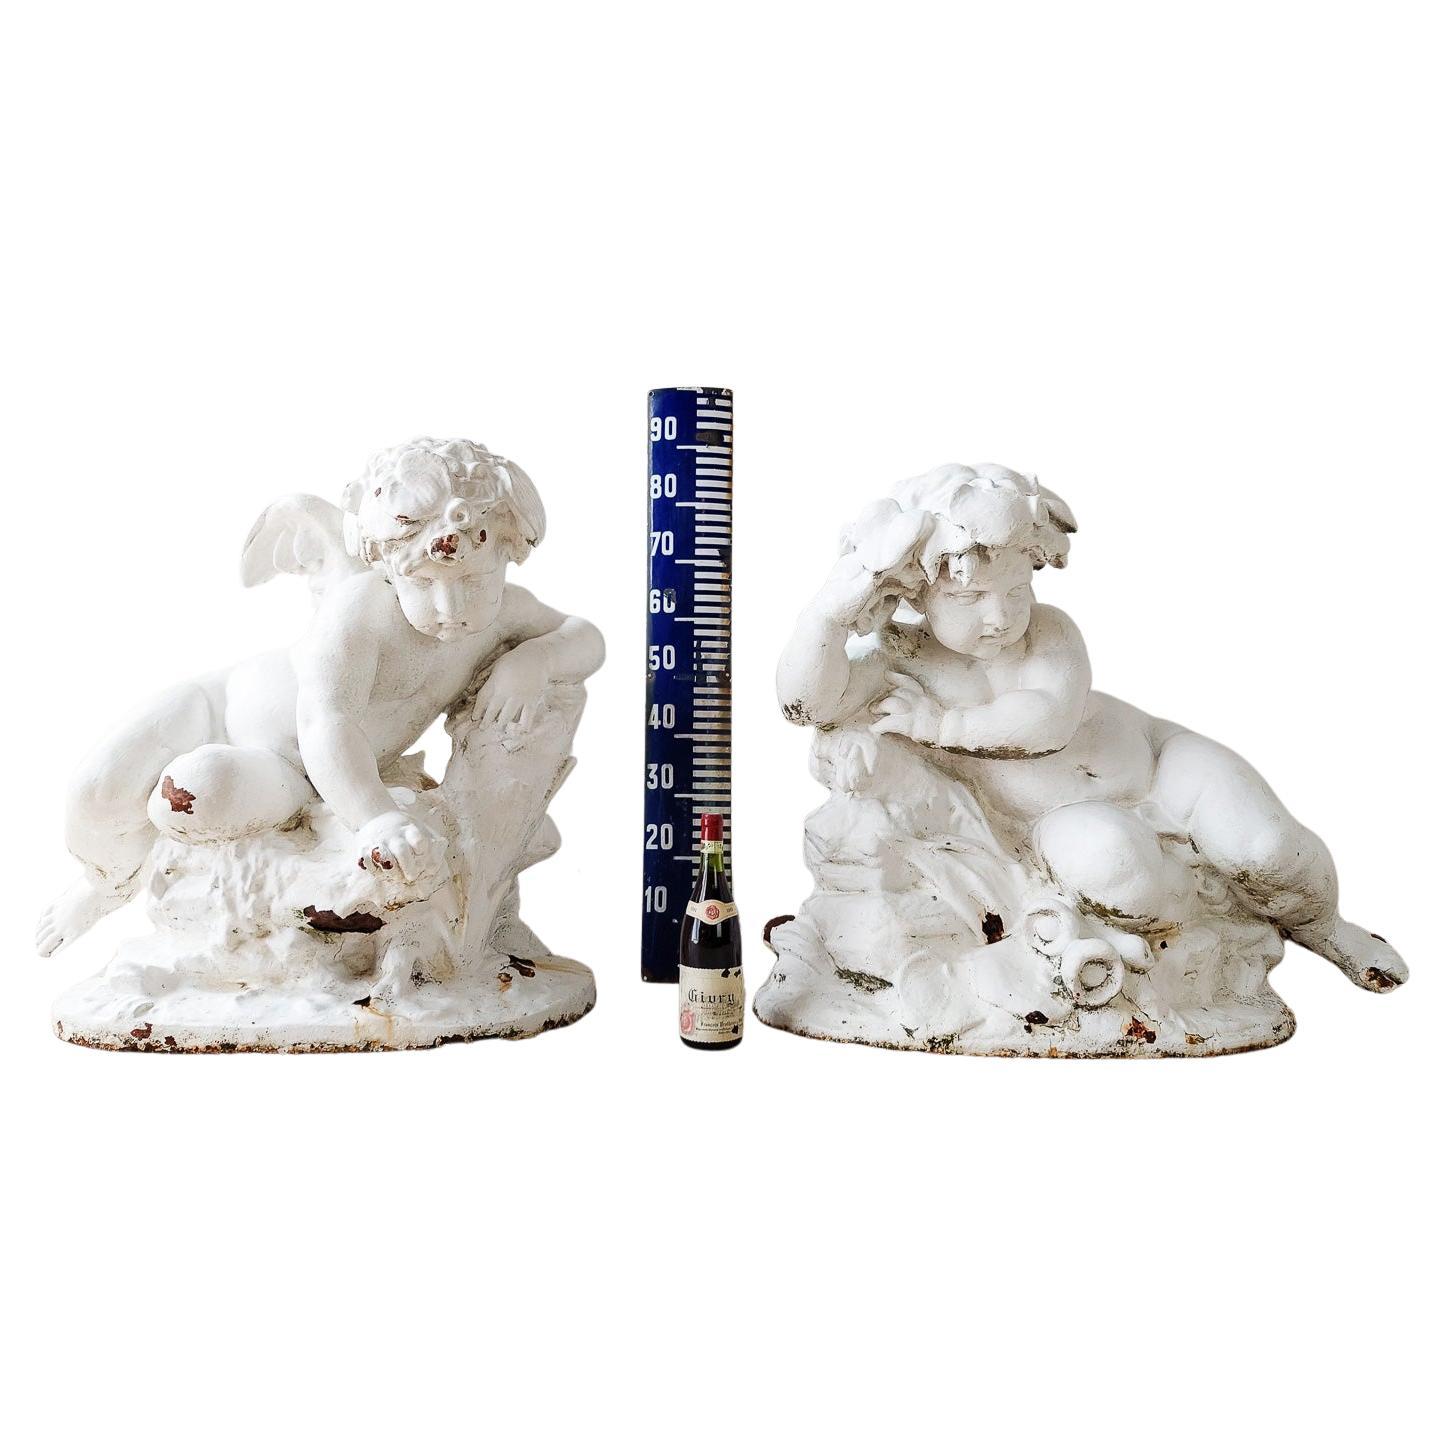 Impressive Pair of 19th Century Monumental Sized Cast Iron Putti For Sale